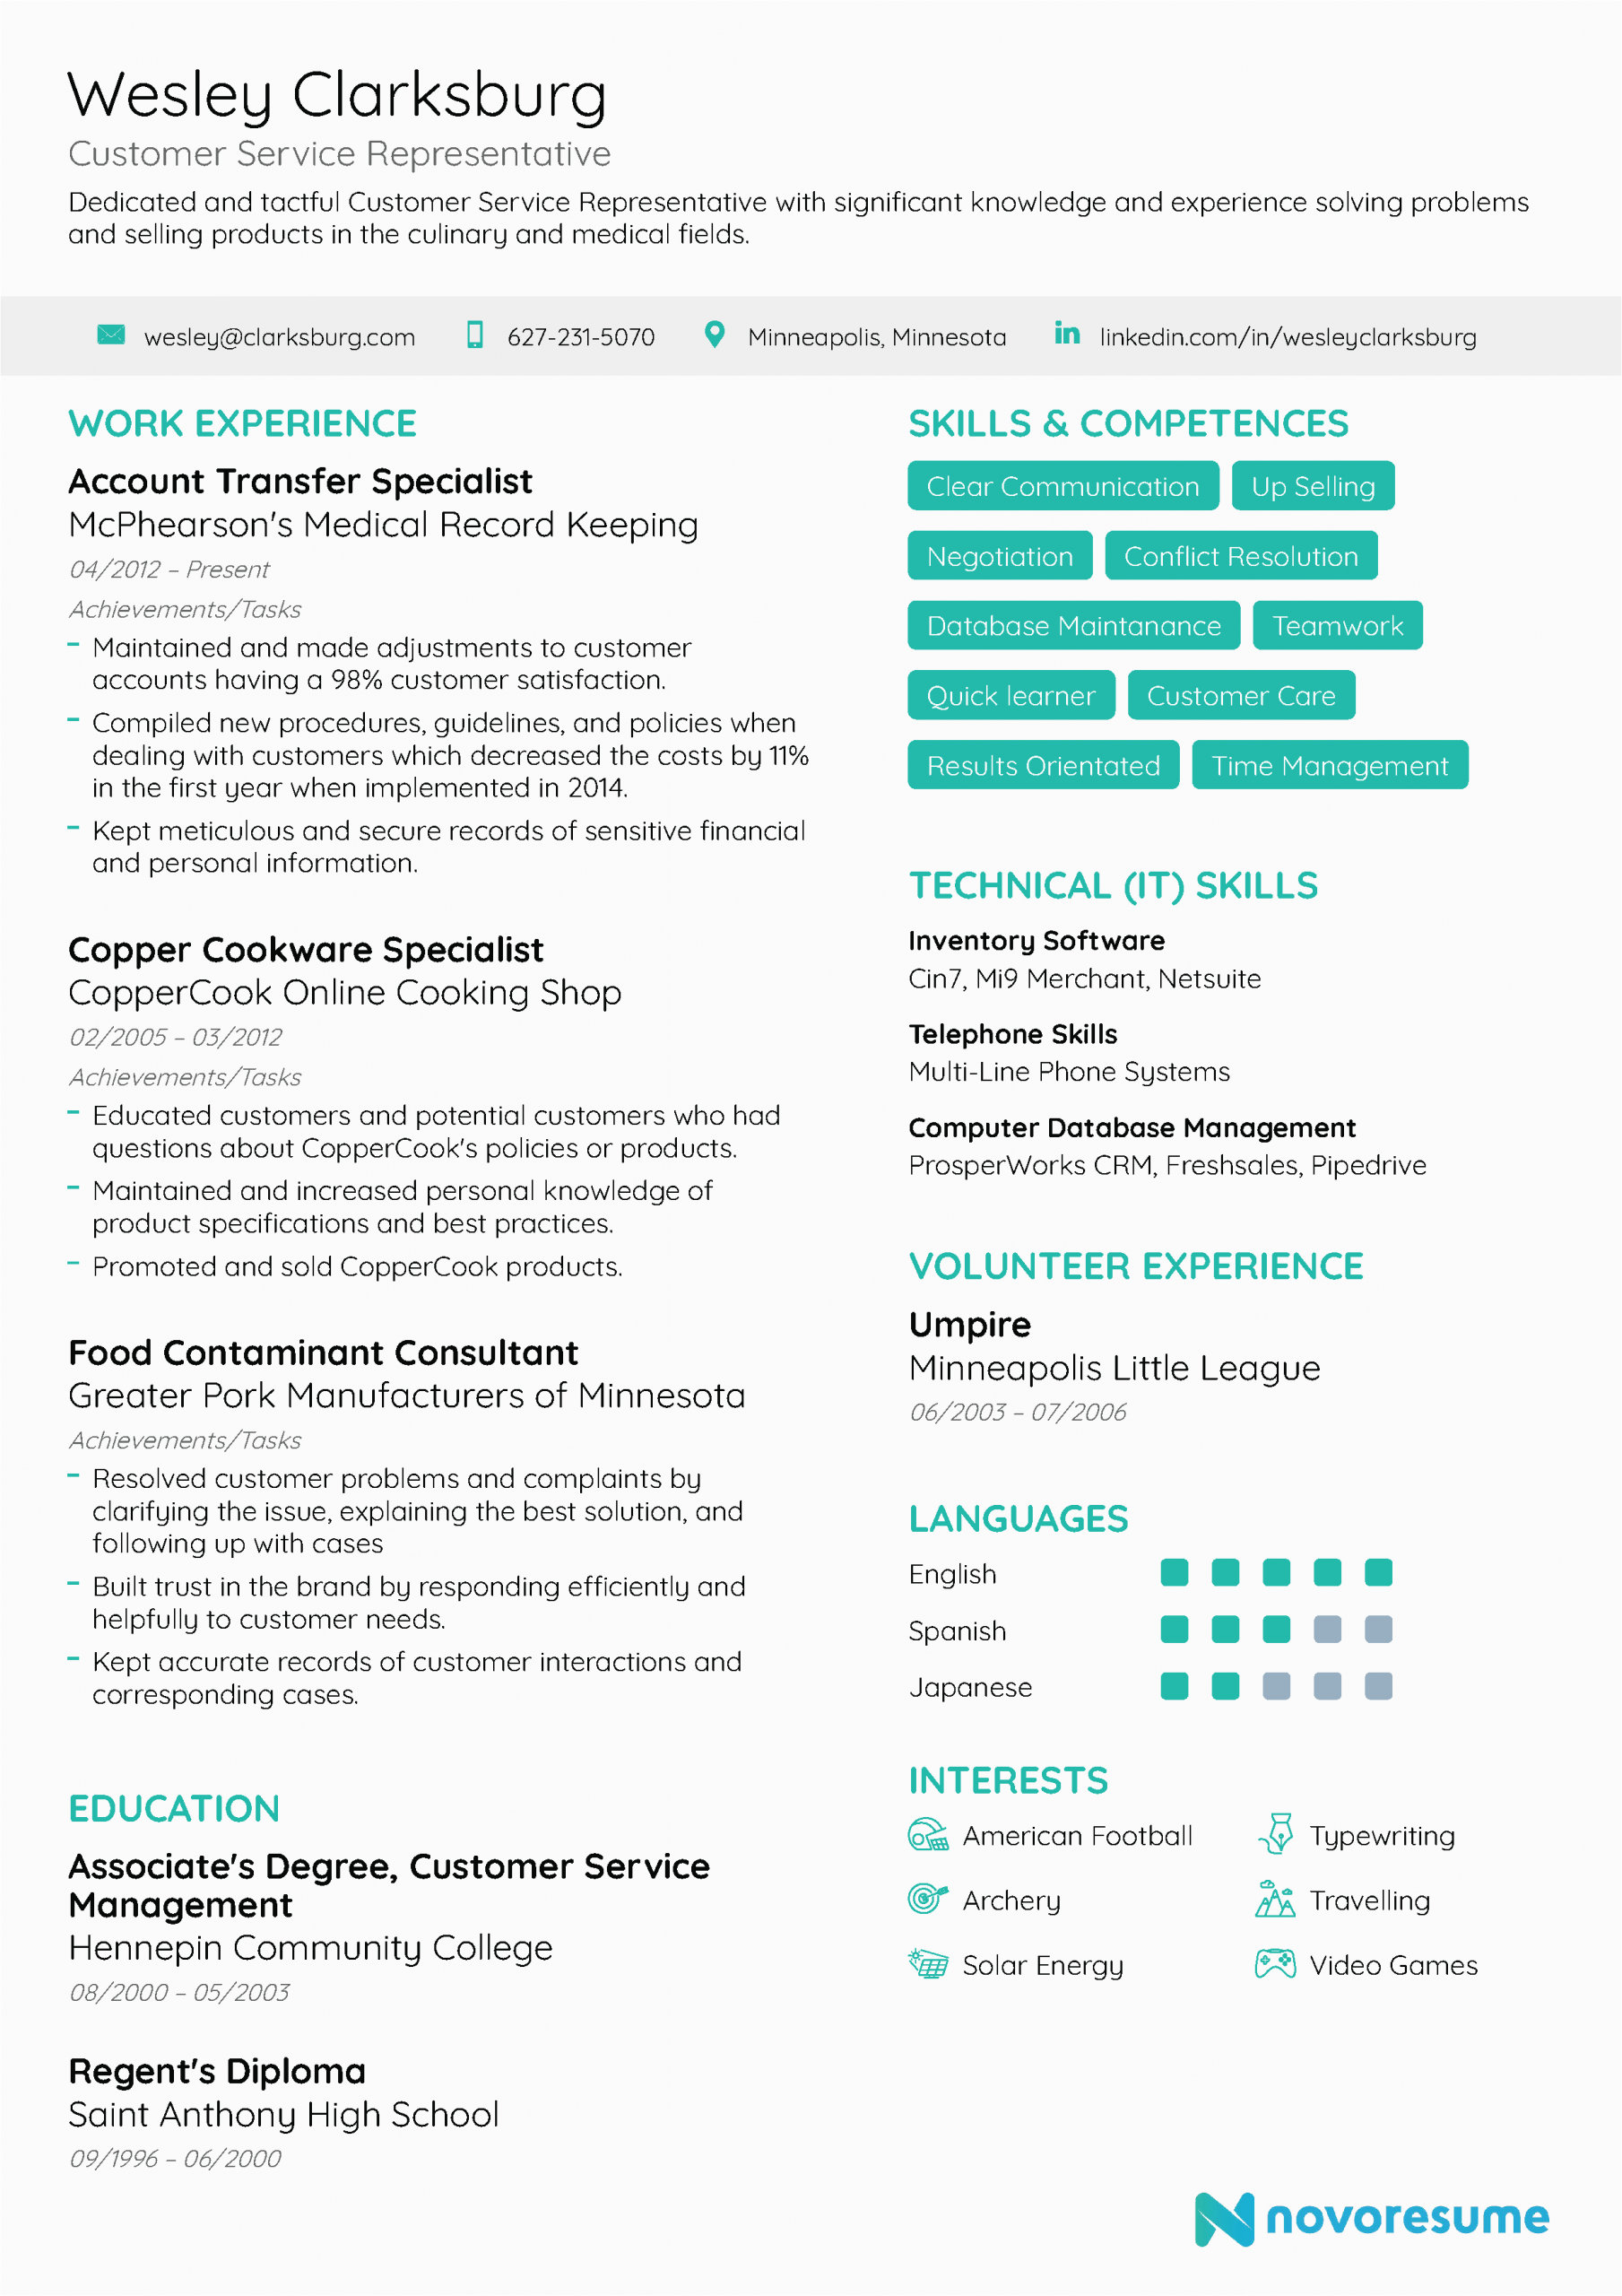 Professional Summary Resume Sample for Customer Service Customer Service Resume [2021] Examples & Guide